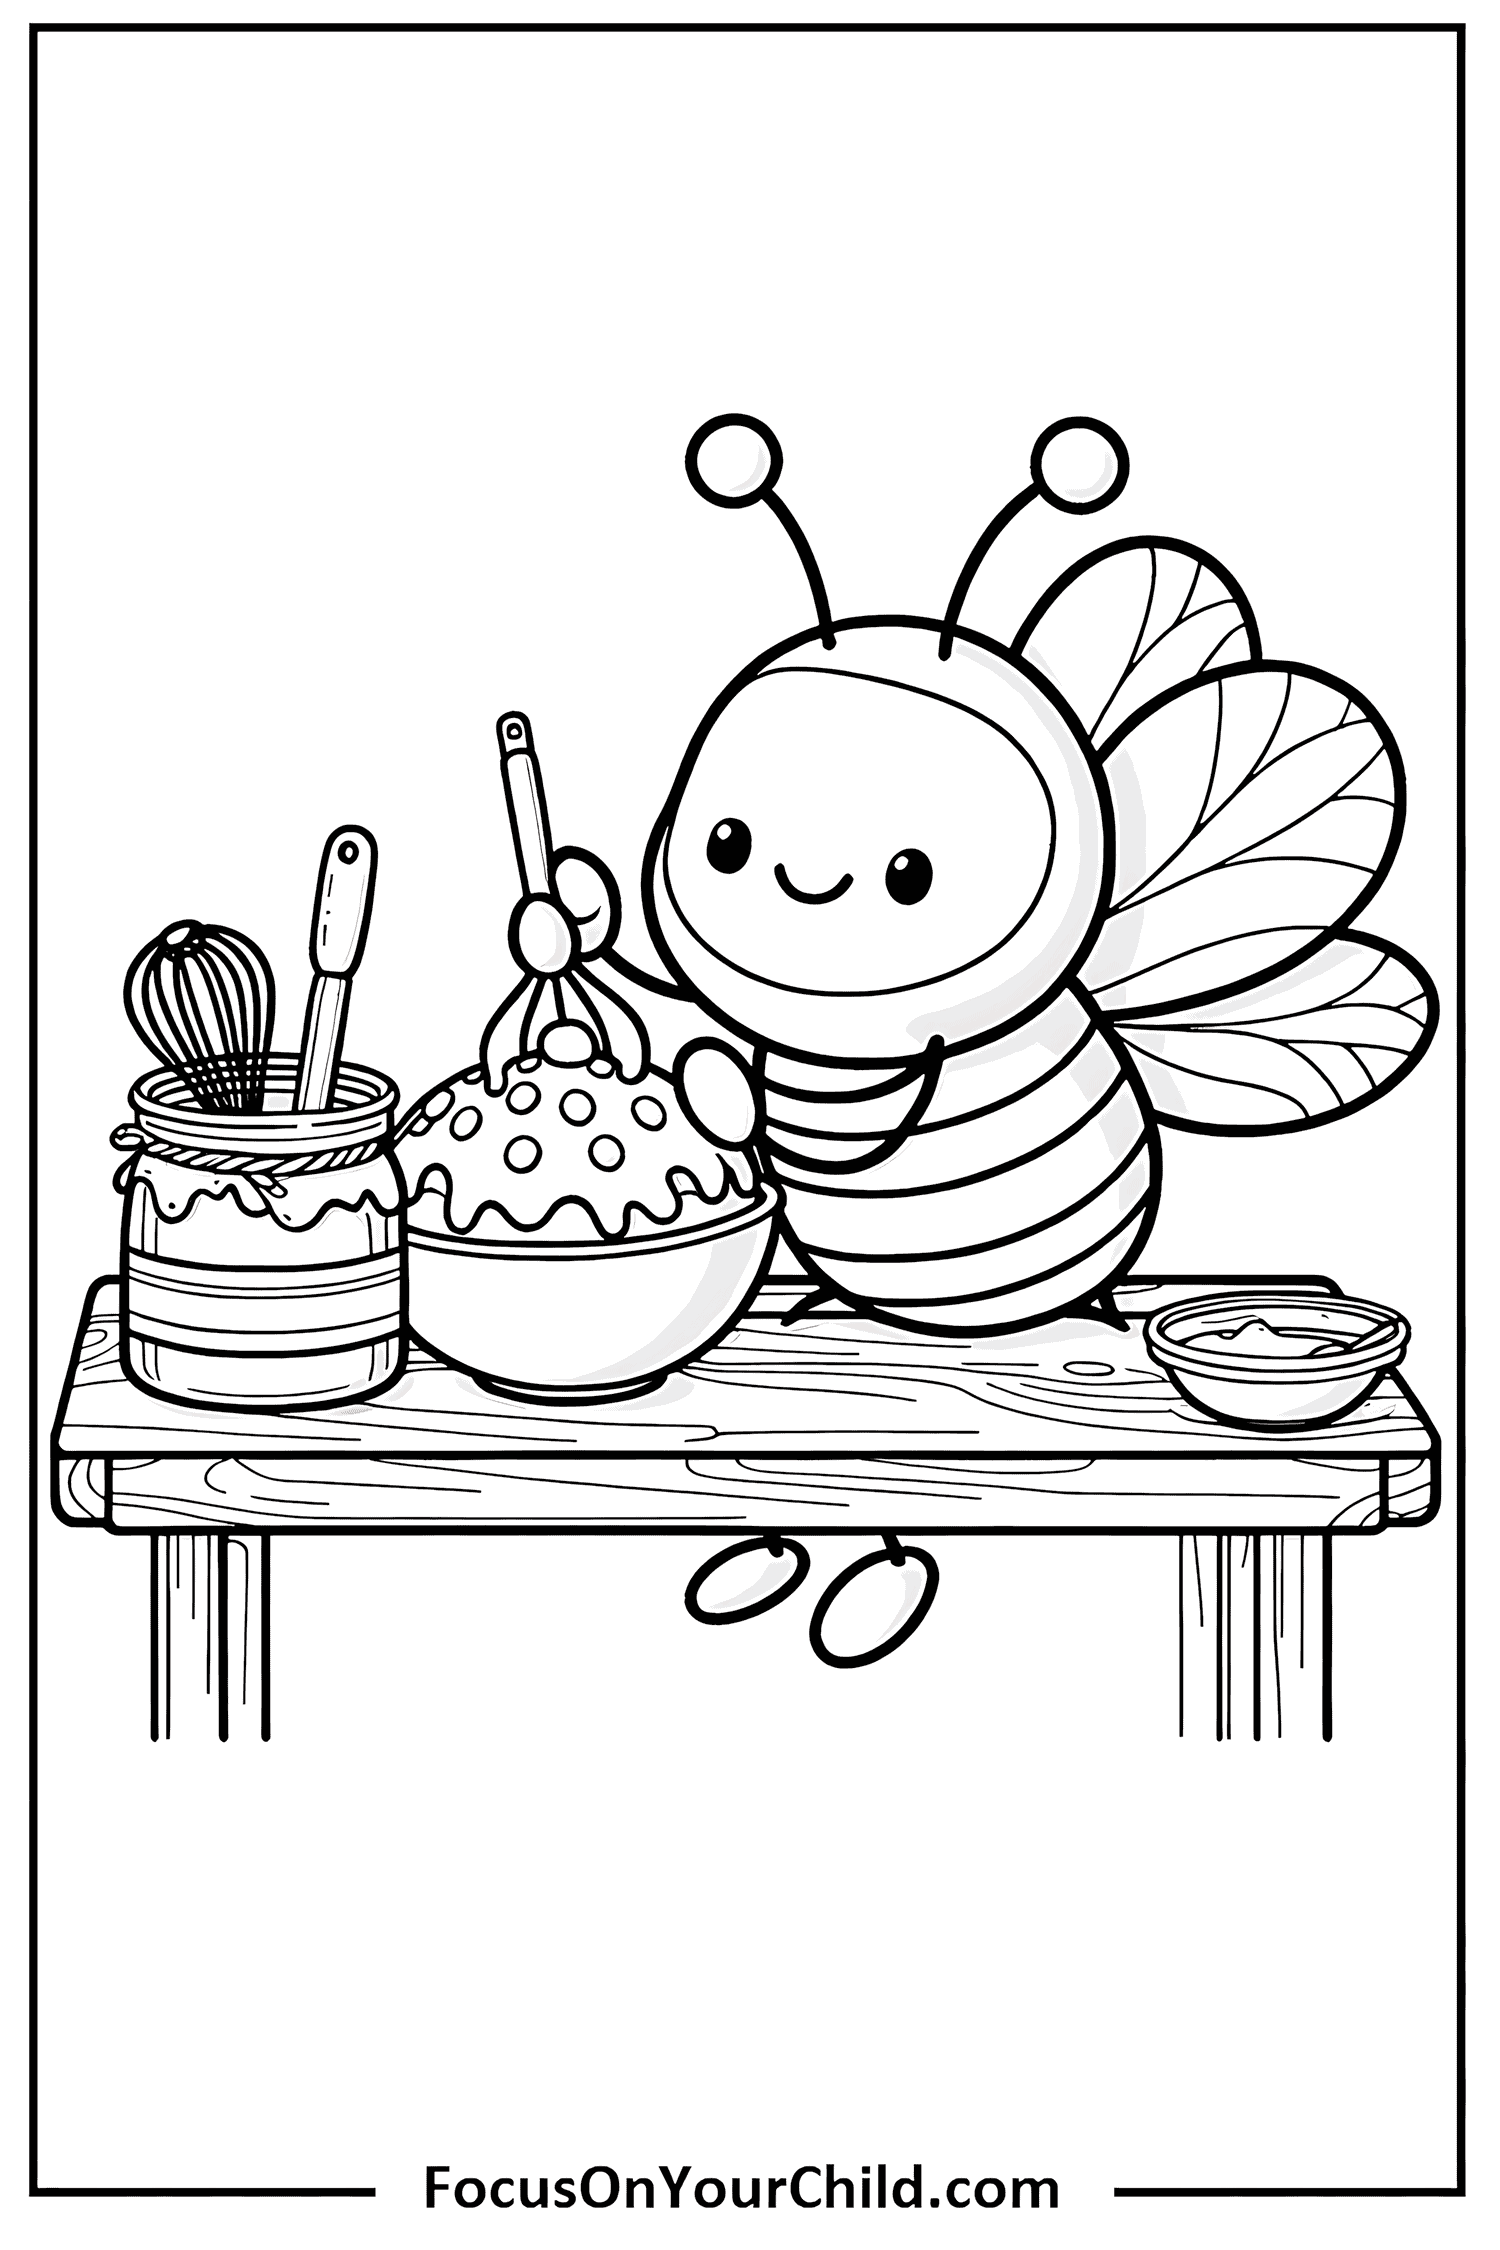 Cartoon bee baking with mixing bowl and kitchen utensils.